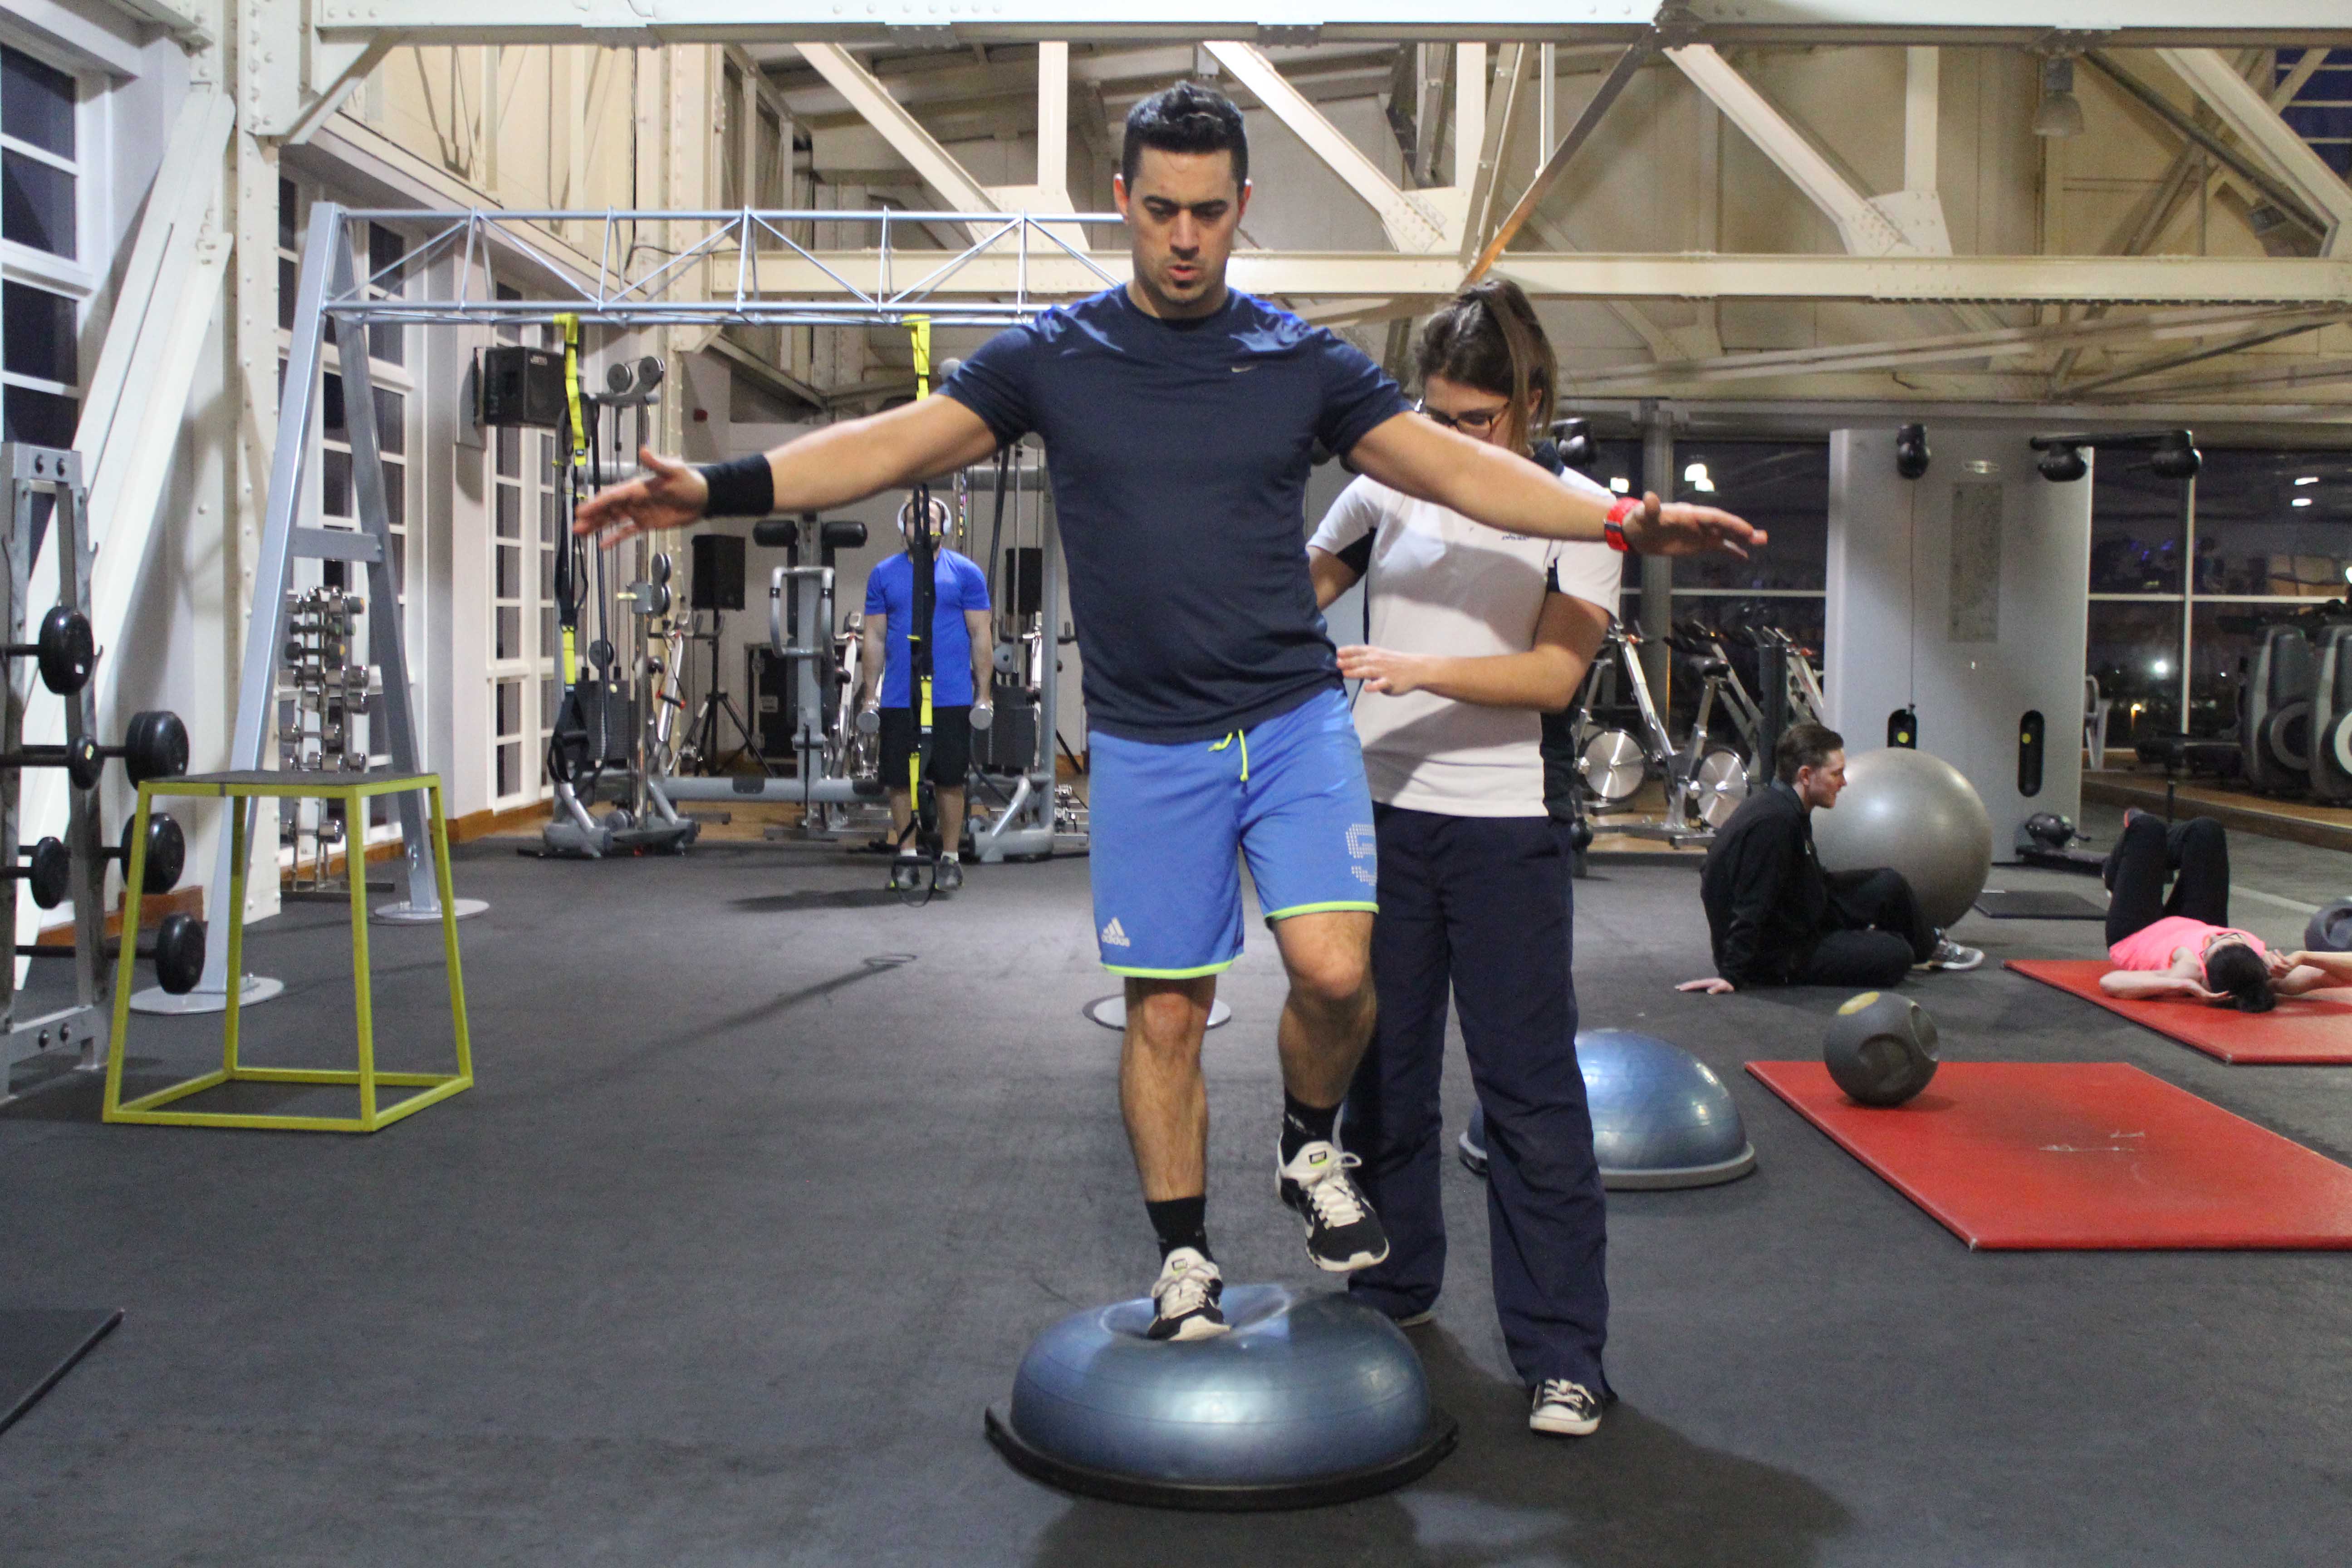 Knee stability exercises supervised by specialist MSK physiotherapist